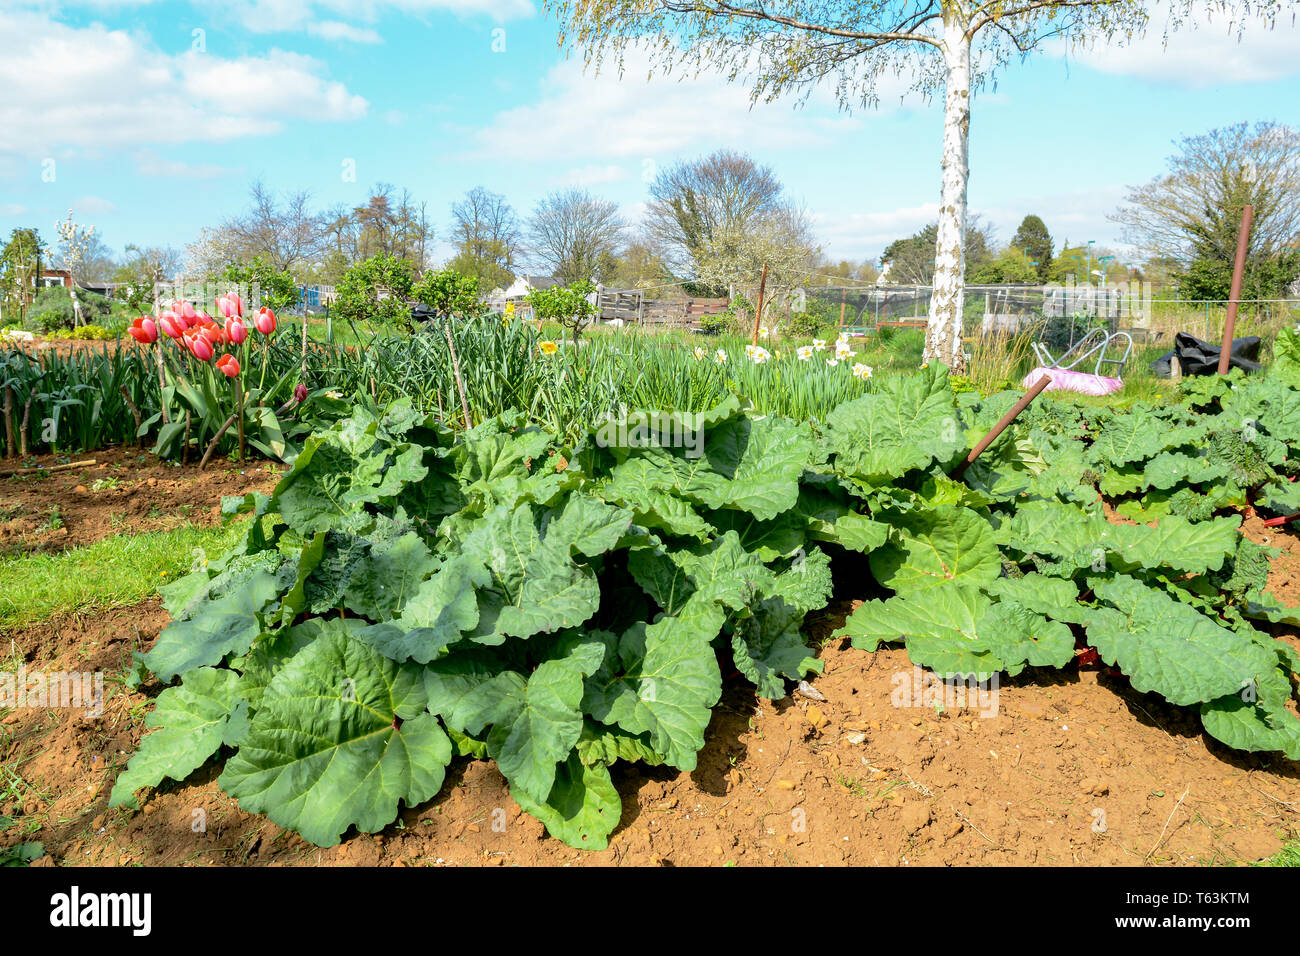 Rhubarb growing in a vegetable plot Stock Photo